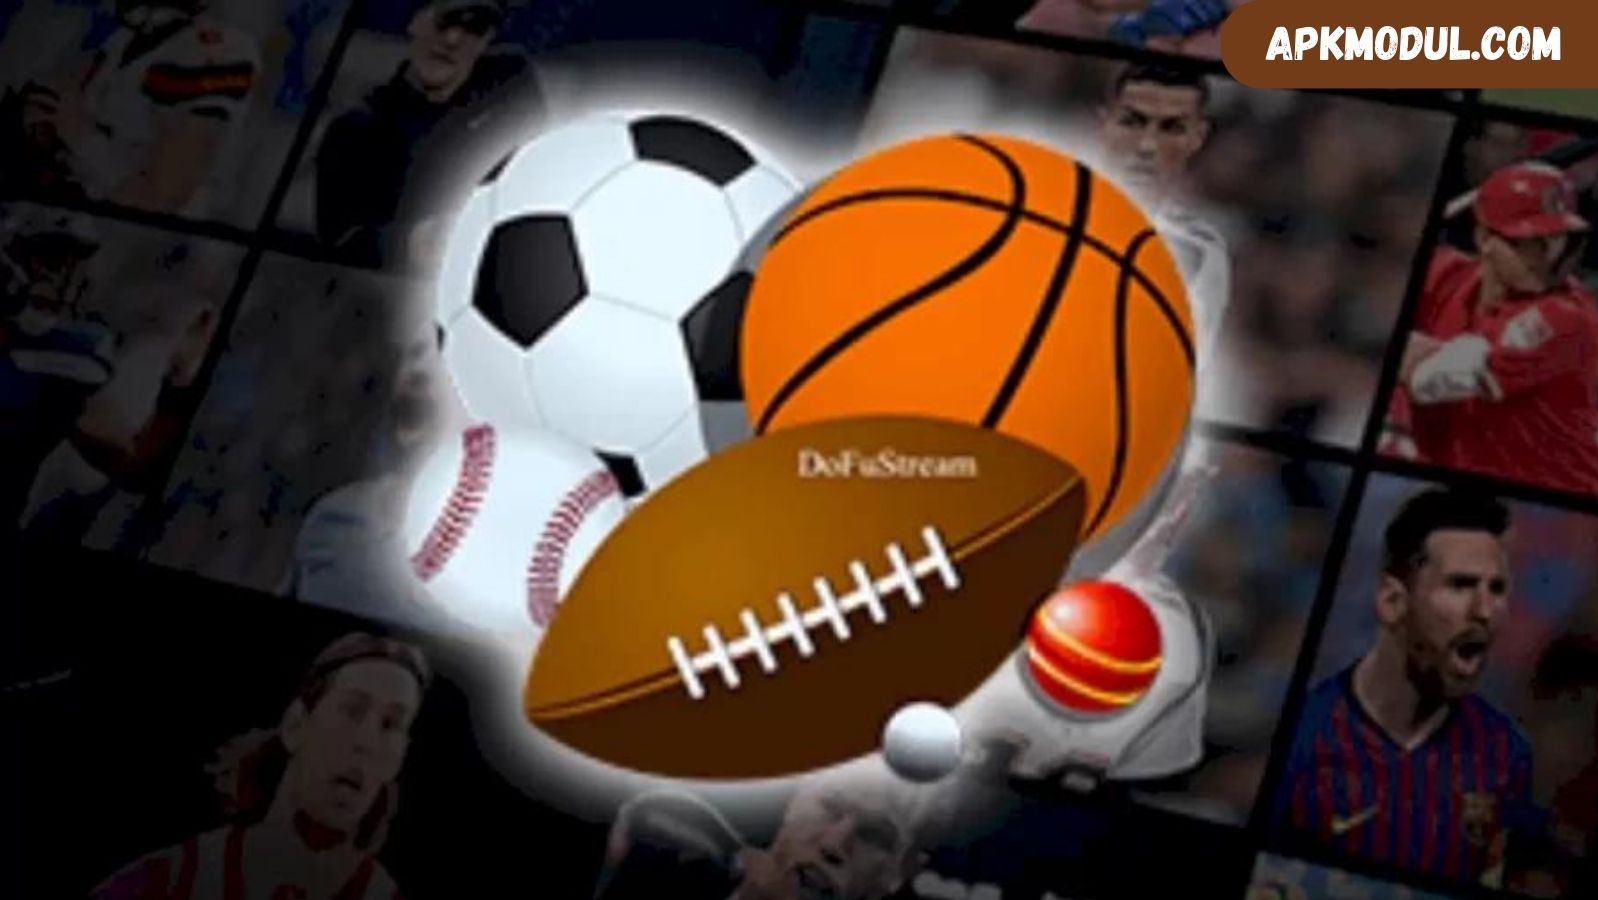 Dofu Sports App Download For Android 1.2.45